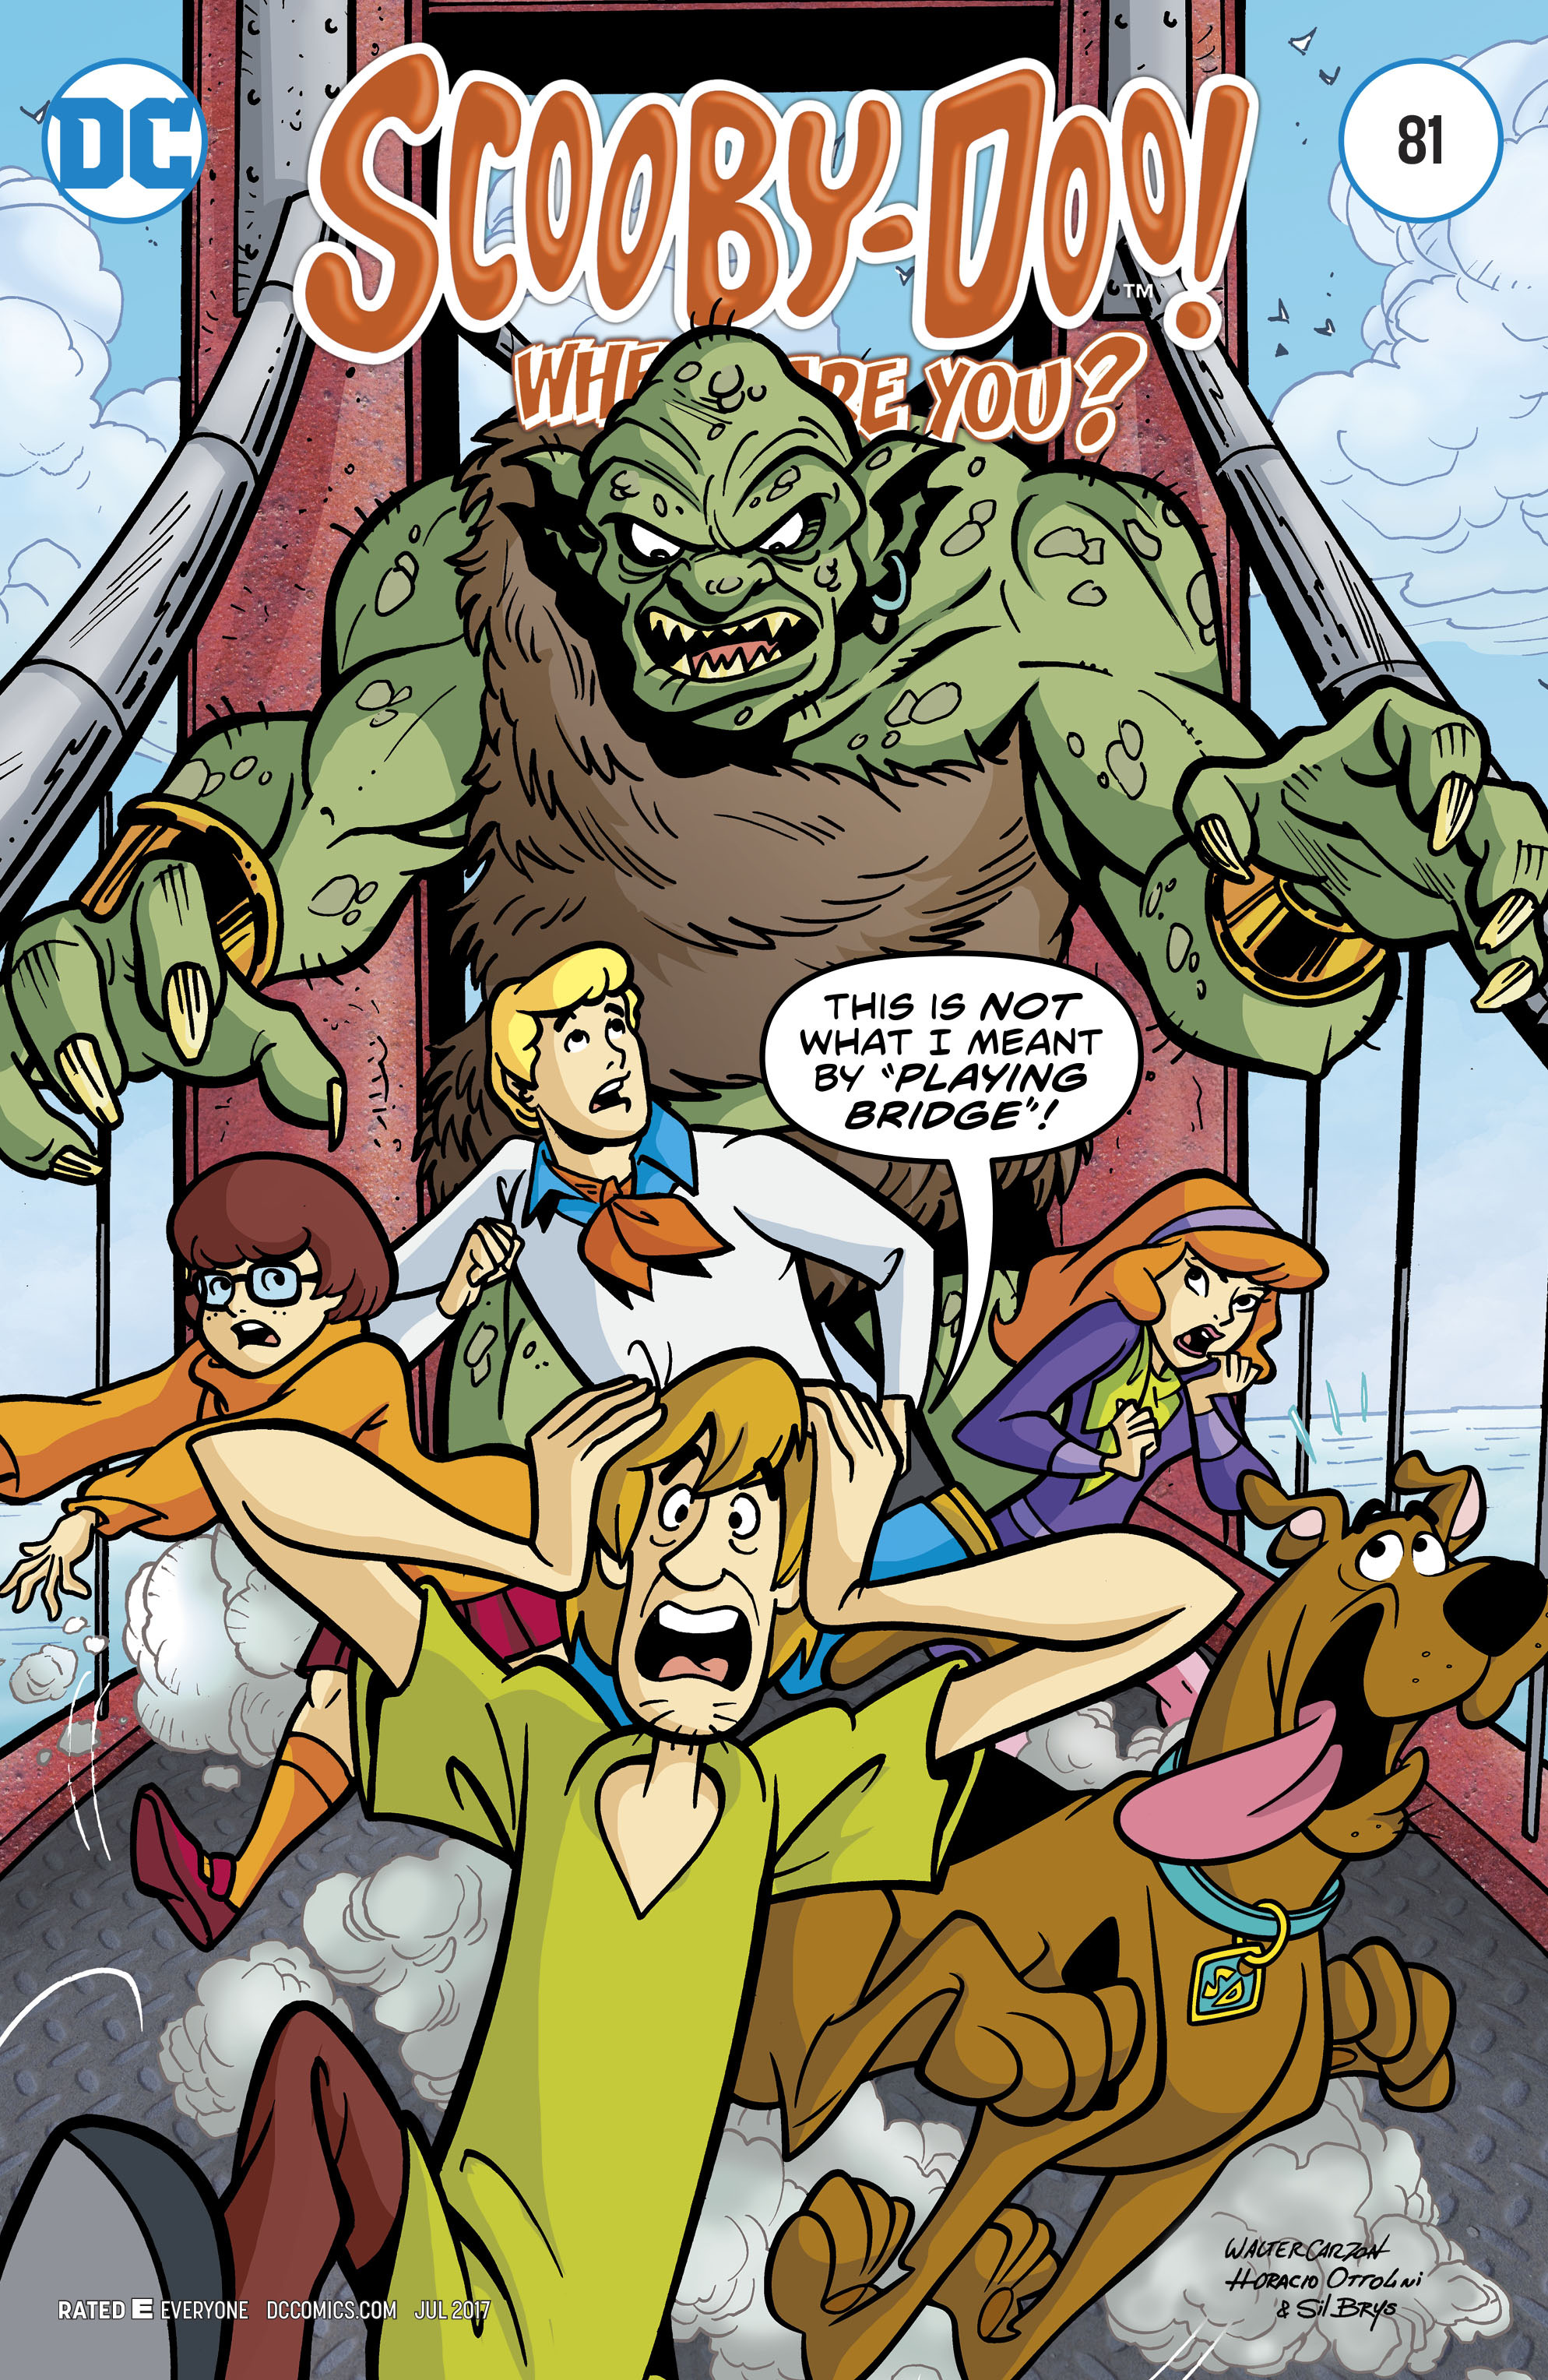 Read online Scooby-Doo: Where Are You? comic -  Issue #81 - 1